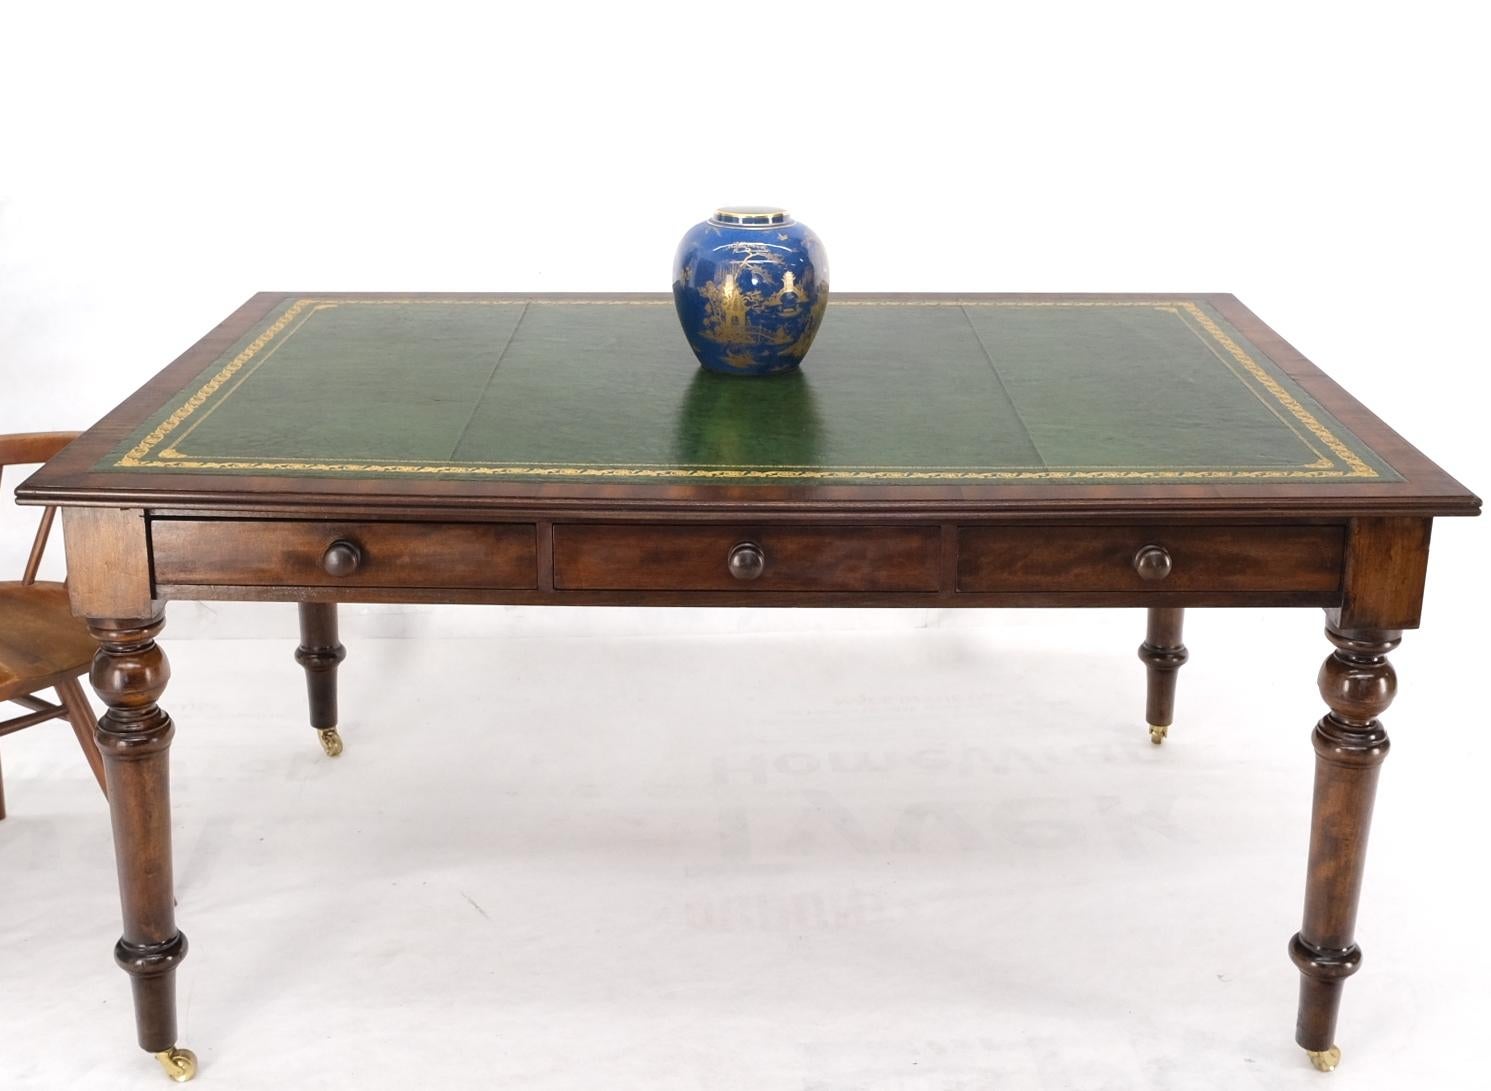 Large antique deep rectangle turned legs green leather top library table partners desk brass casters mint.